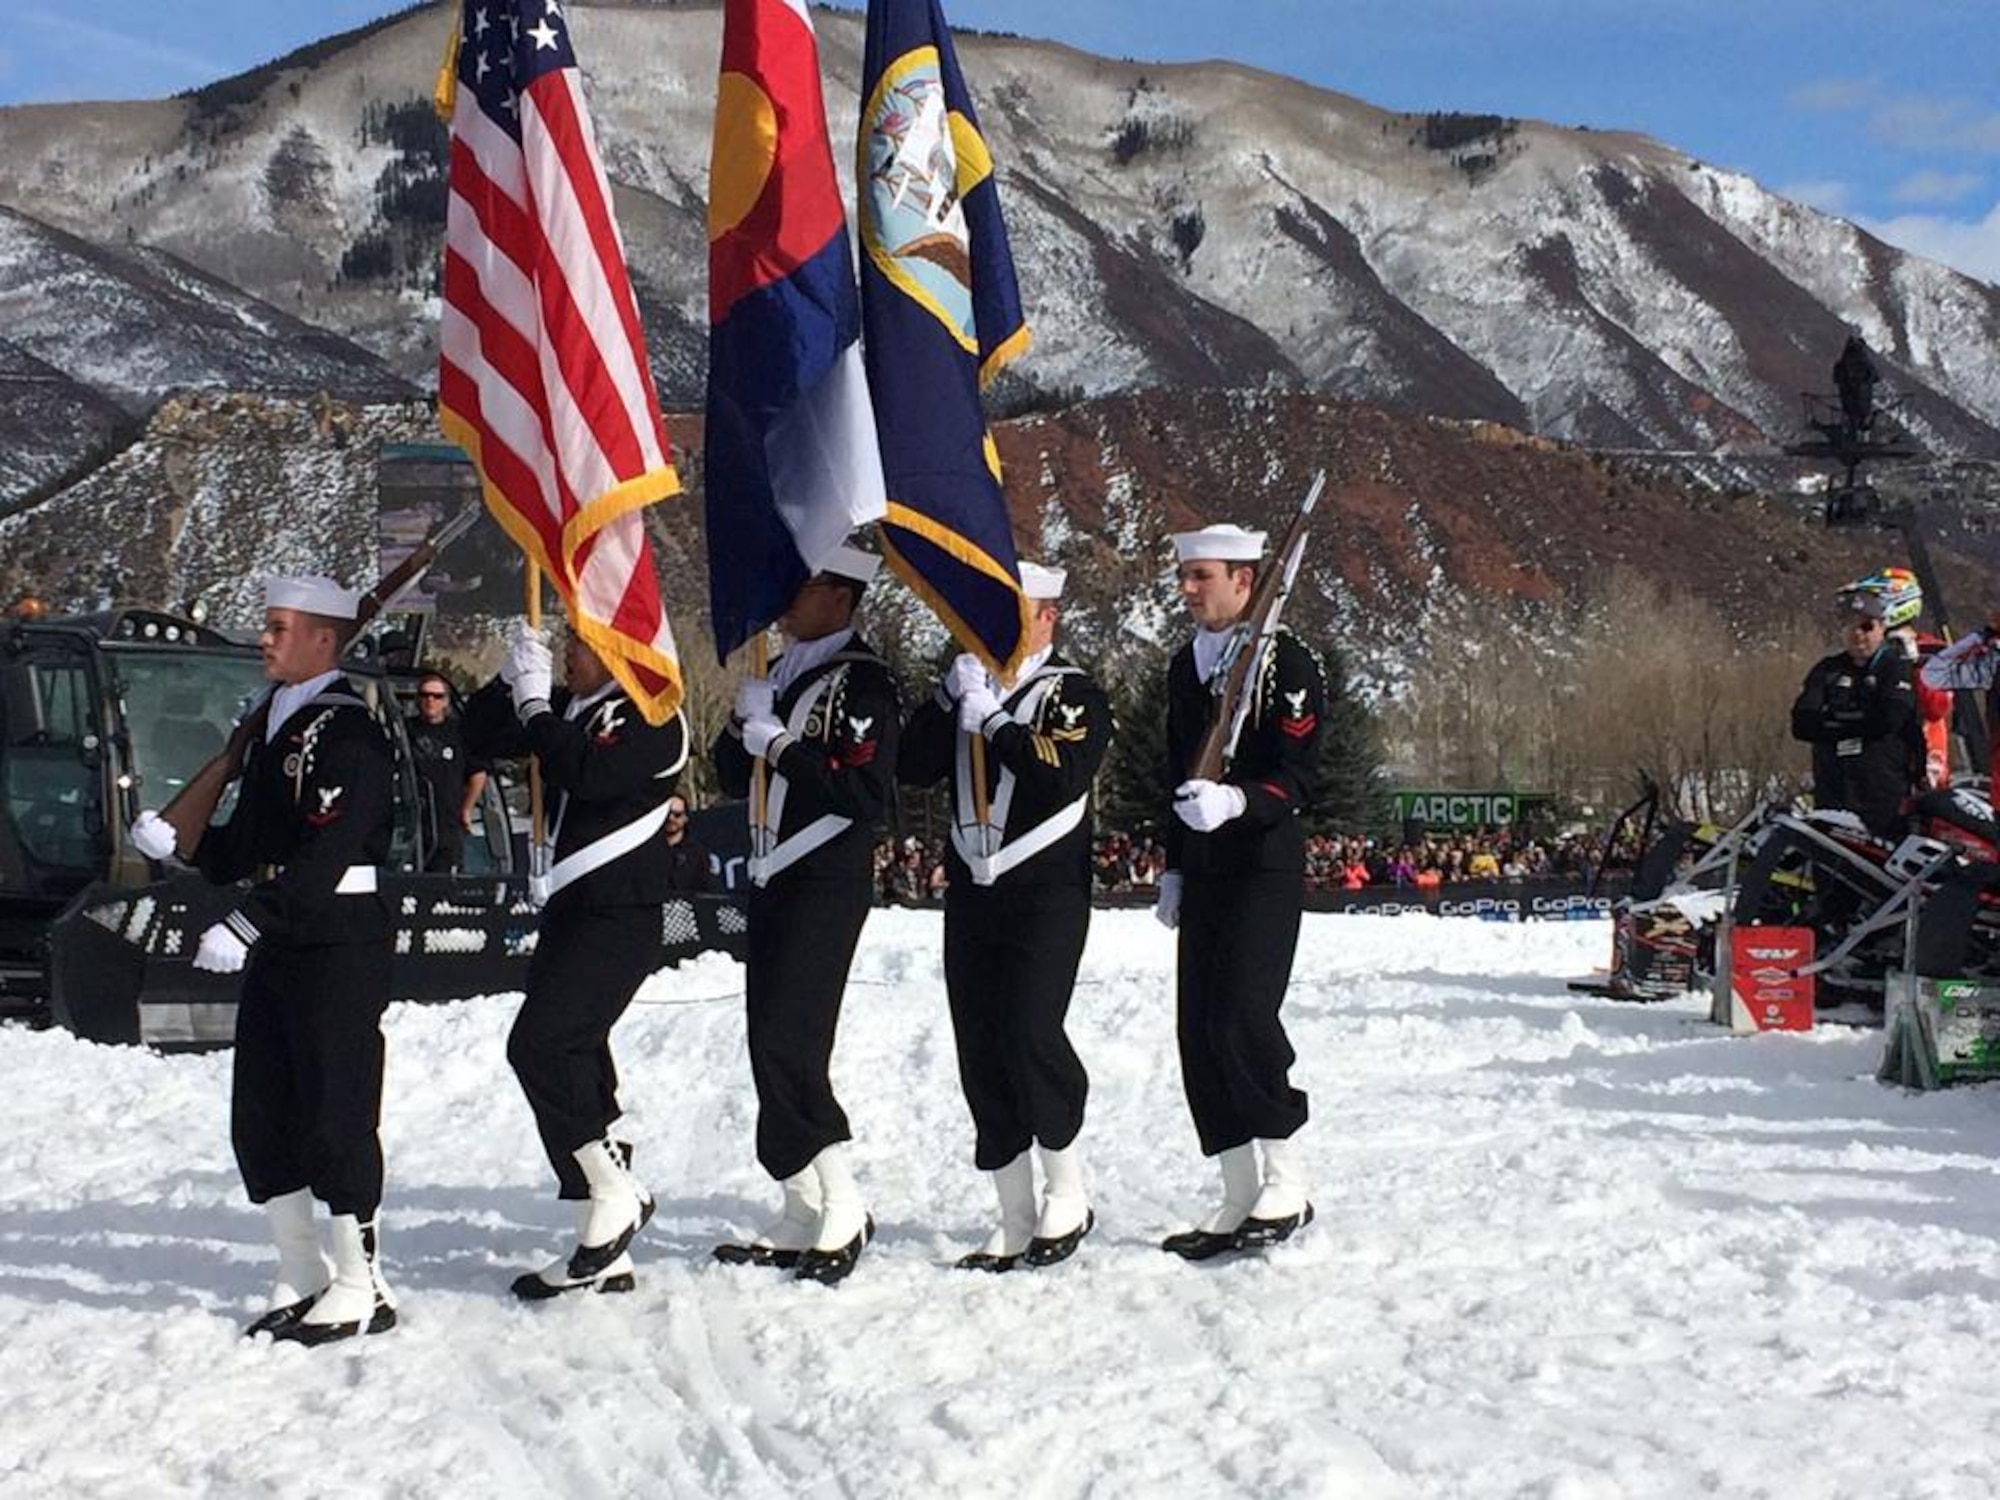 On the morning of Jan. 25, 2015, the Navy Information Operations Command Colorado Color Guard team was cordially invited to represent the United States Navy at the 2015 Winter X-Games held in Aspen, Colorado. The team was comprised of five Sailors: CTT1(IDW/SG) Christopher Guy, CTR2(IDW/SW) David Fiedler, CTT2(IDW/SW) Ian Evanskey, IT2(IDW) Christopher Dizon, and CTR3(IDW) Matthew Elder. The team honorably presented the colors during the playing of the National Anthem before the Snow Cross Finals event. The team flawlessly executed the detailed maneuvers despite the snowy terrain on a national televised event. With a successful representation of not only NAVIOCOM Colorado, but the United States Navy as a whole, these Sailors built camaraderie with the community and promoted Esprit de Corps. (courtesy photo) 